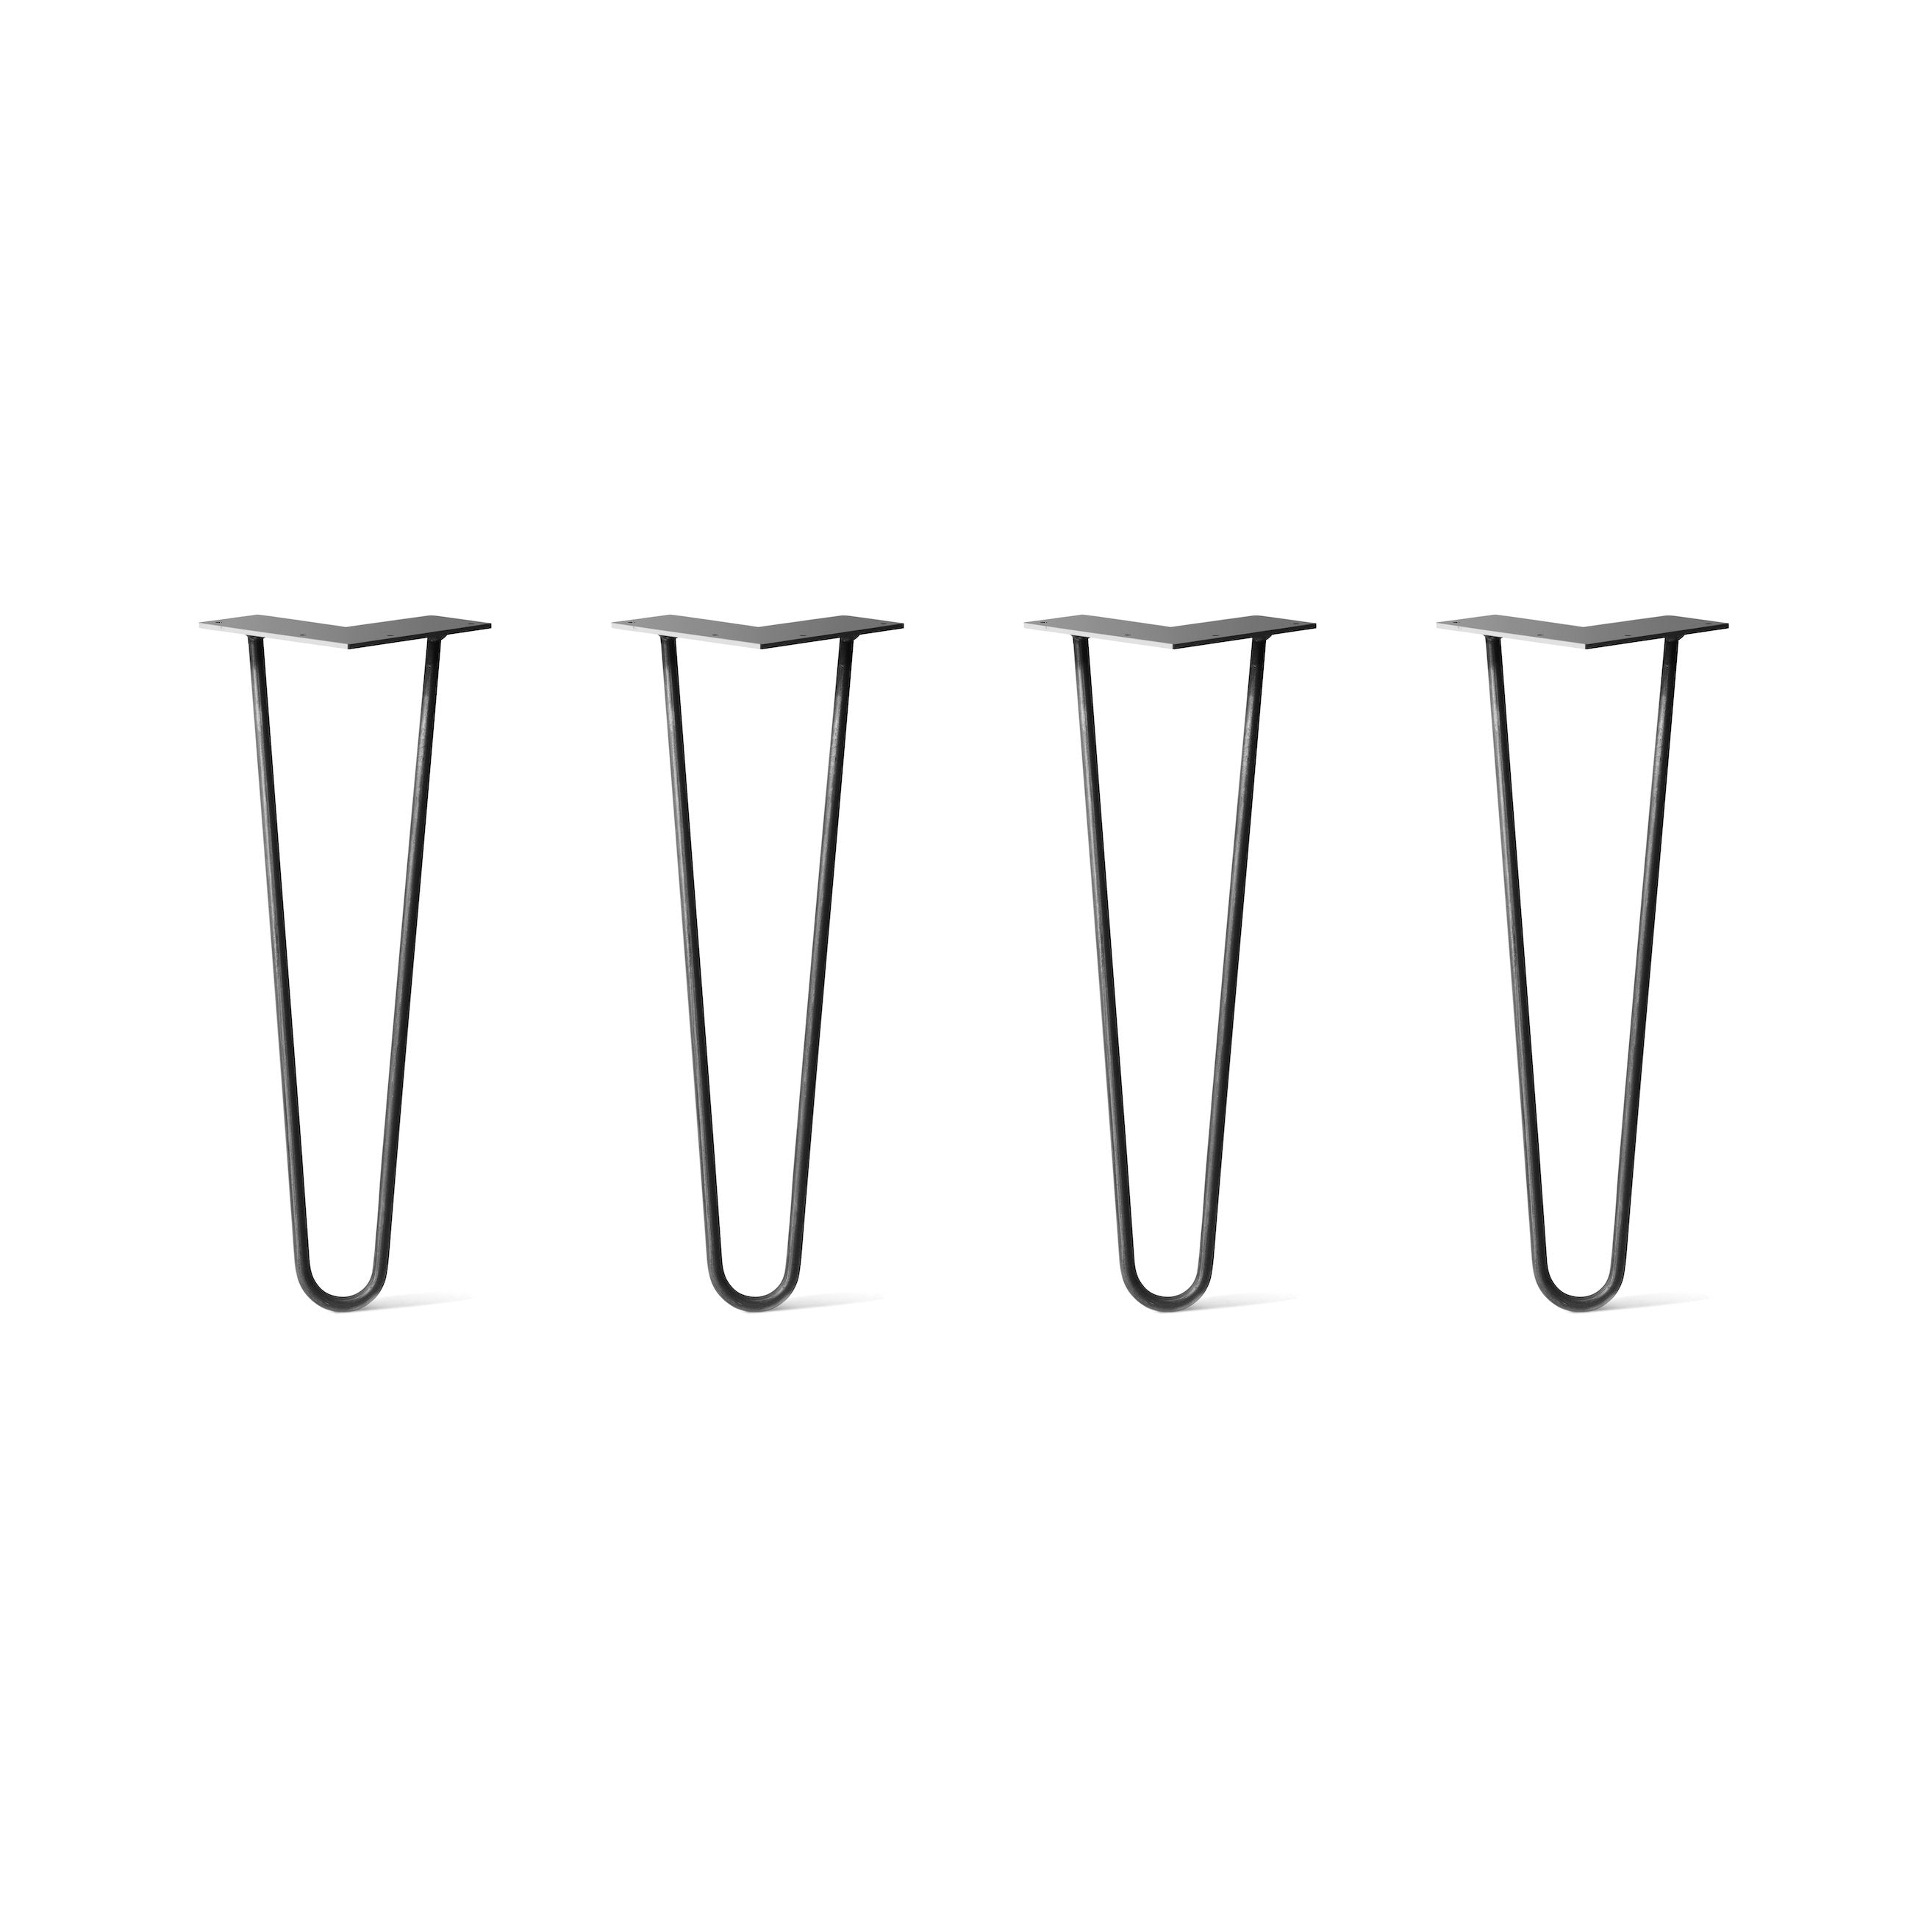 Hairpin Legs - Set of 4 | Shop in Sets and Save | Made in USA – DIY ...